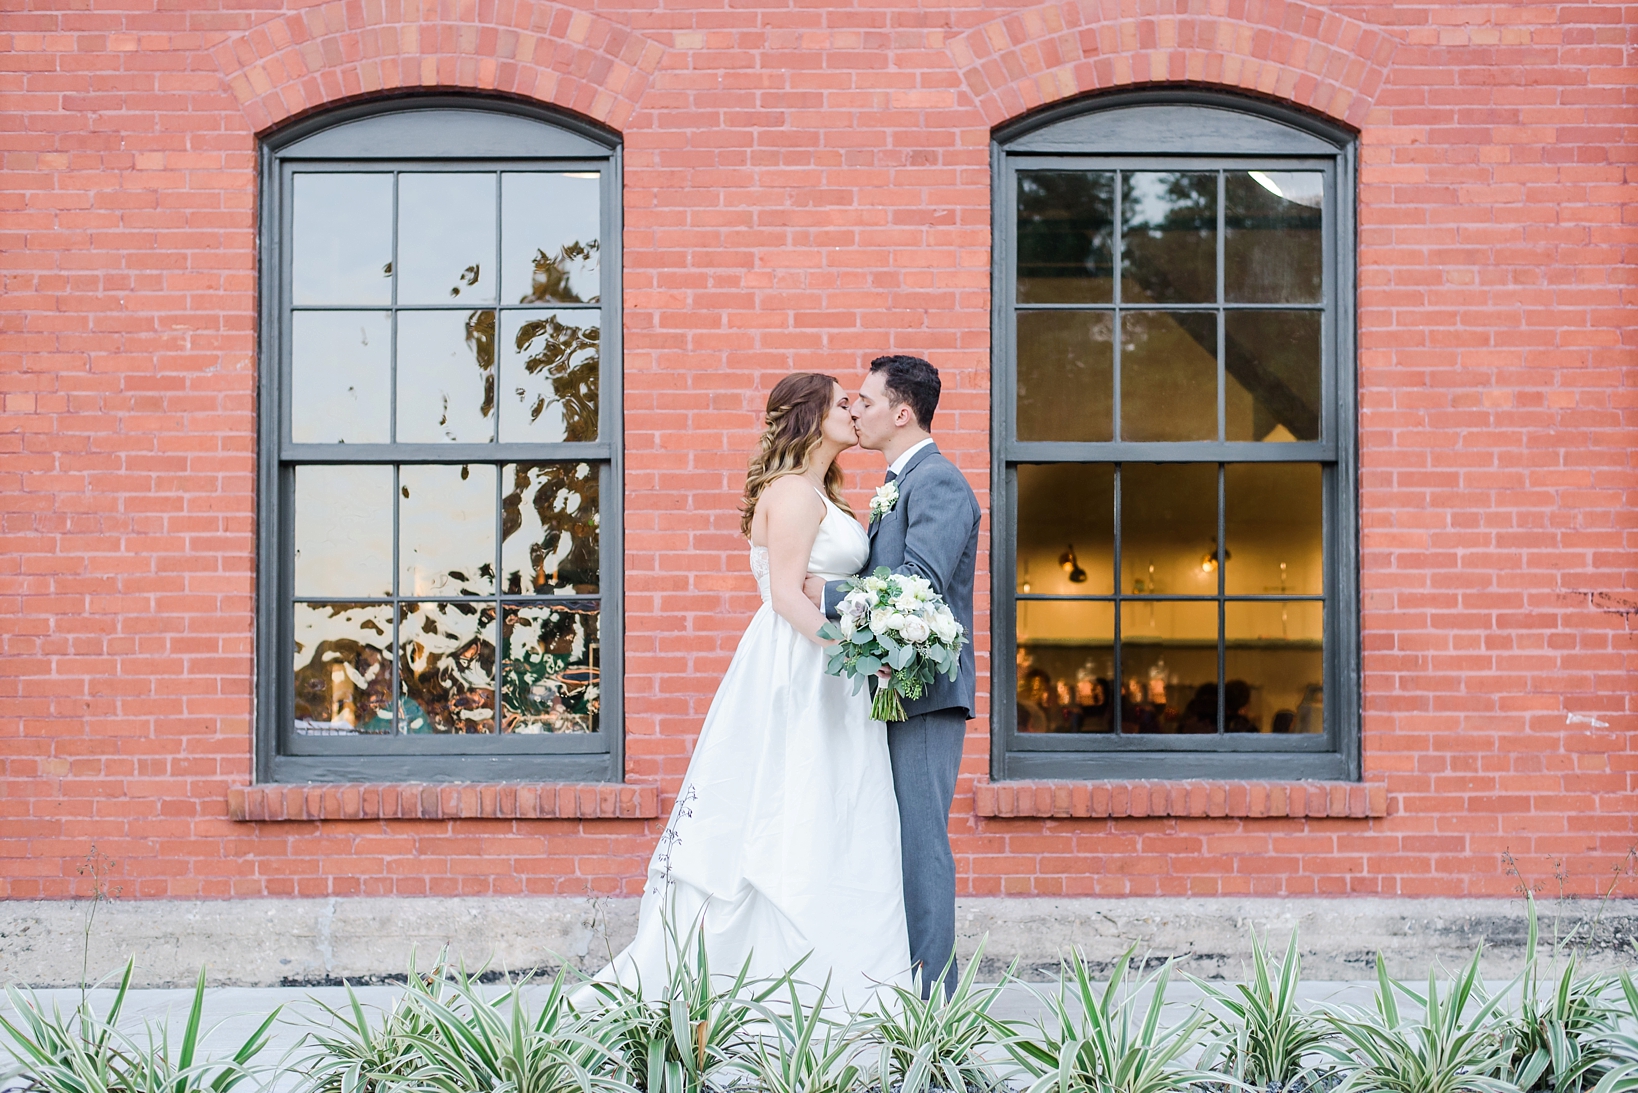 Bride and Groom share a kiss against a brick wall and industrial windows.